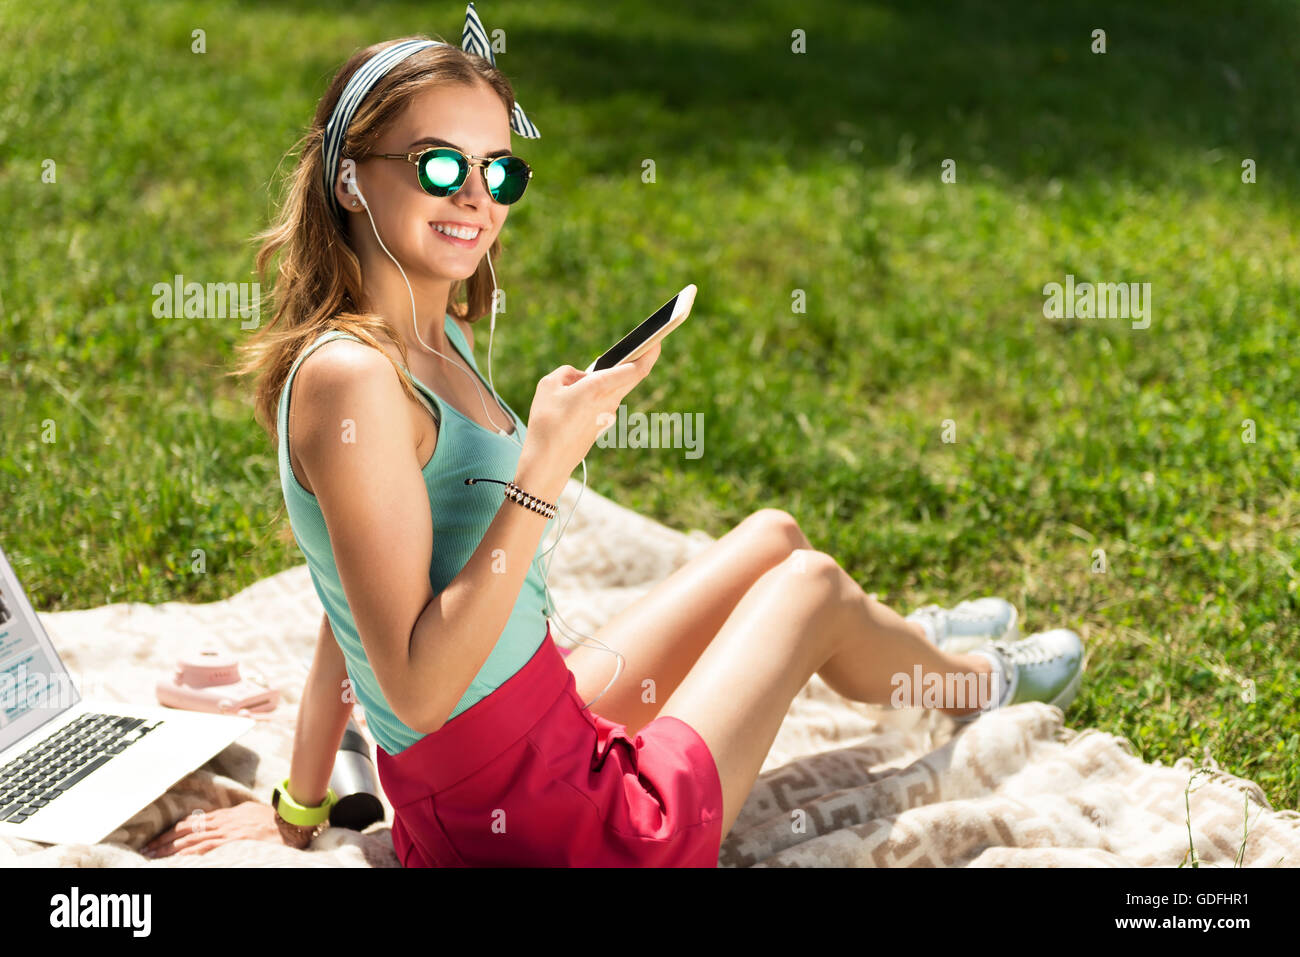 Modern youth relaxing outdoors Stock Photo